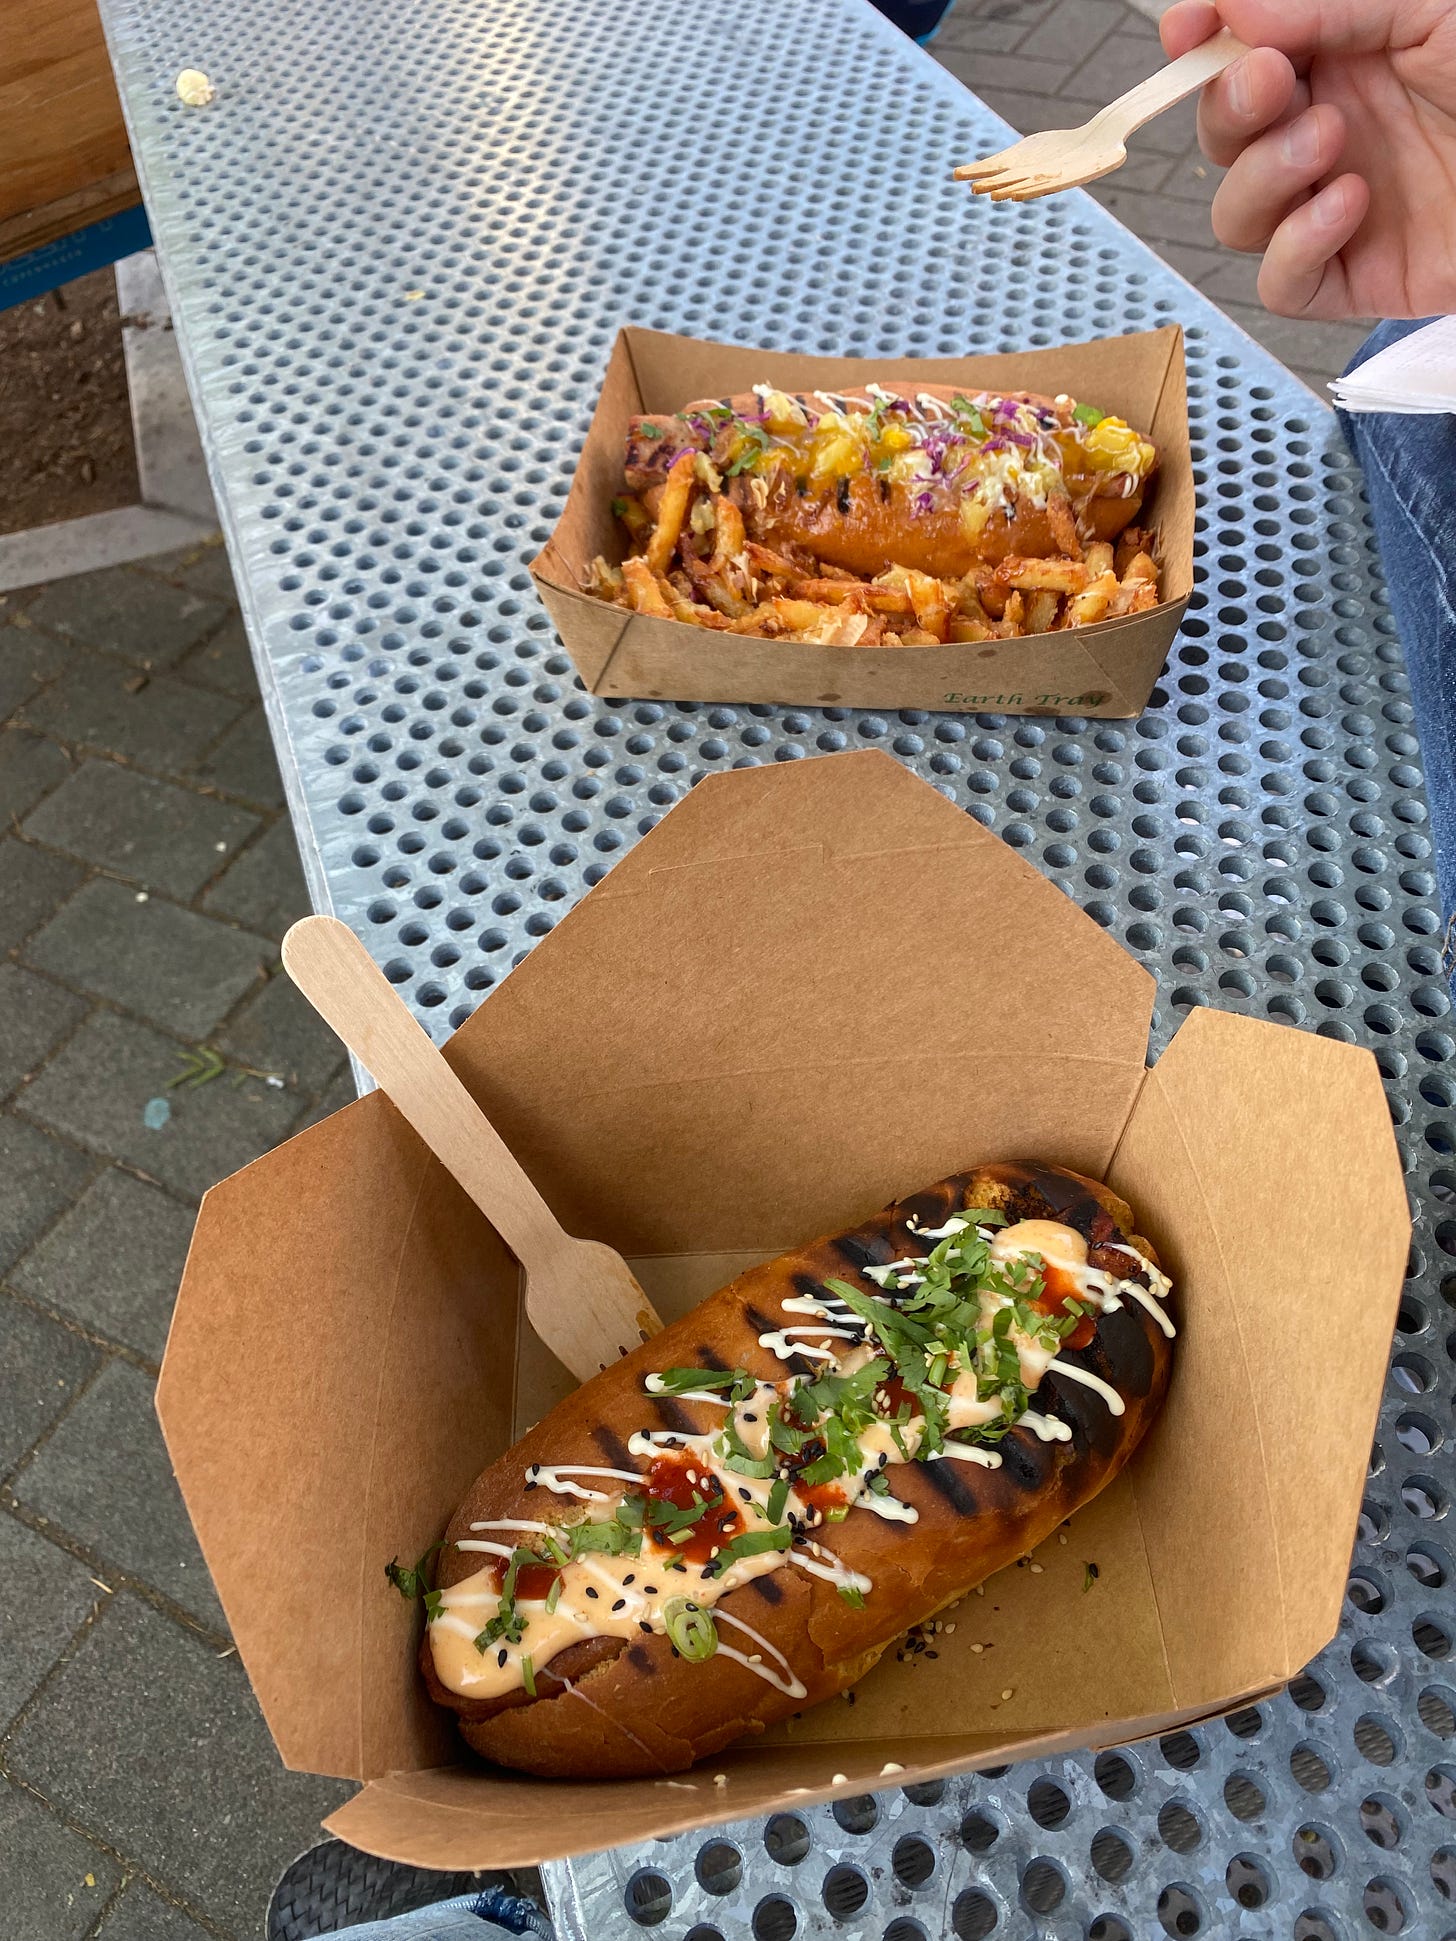 On a metal bench, two paper takeout containers: in the front, a hero with drizzles of spicy mayo, regular mayo, and hot sauce, dusted with green onions and sesame seeds; in behind it, a hero with mango sauce and green onions, and fries drizzled with mayo and sprinkled with nori. Jeff's hand holds a wooden fork over the container.